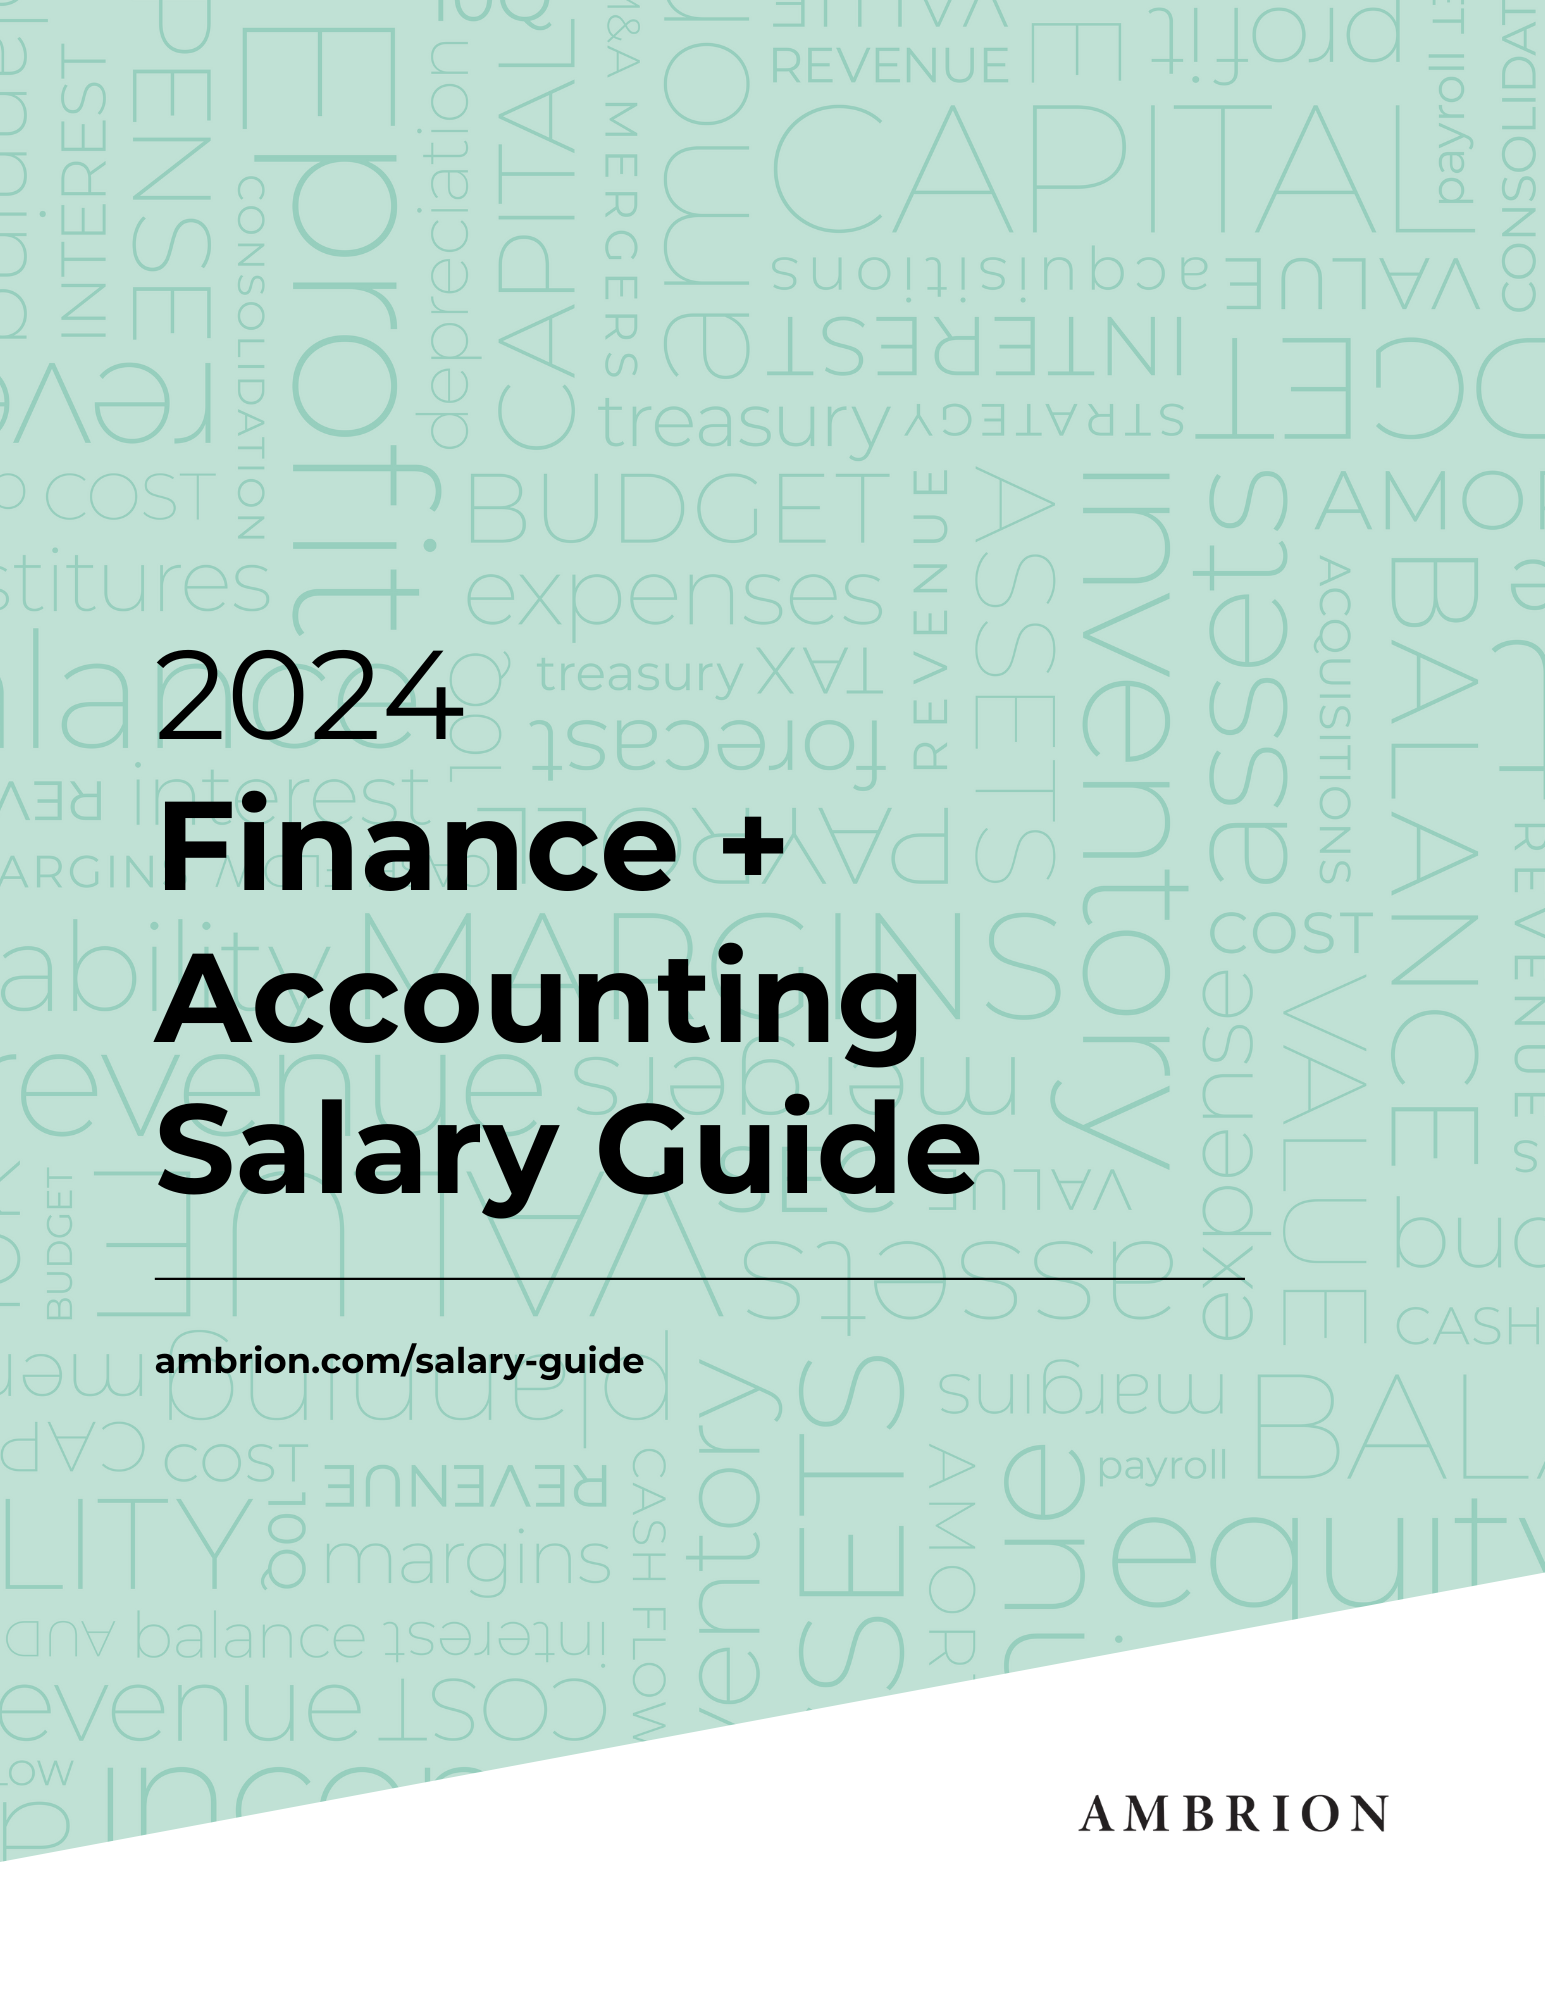 Salary Guide - AMBRION - Experienced Search Consultants, Accounting ...